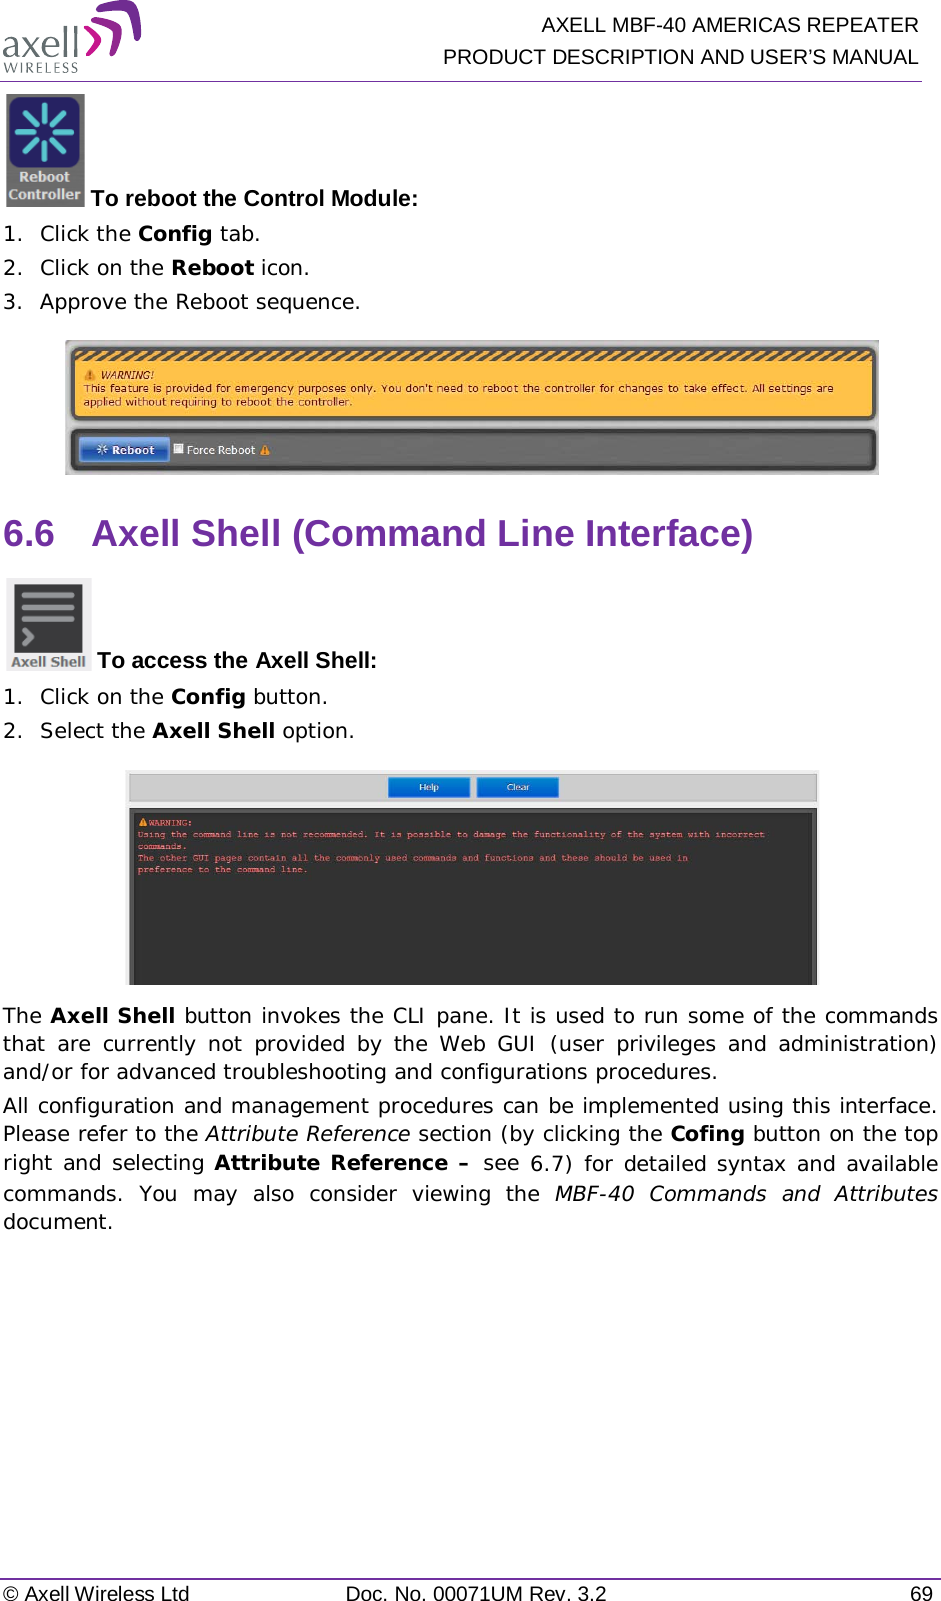   AXELL MBF-40 AMERICAS REPEATER PRODUCT DESCRIPTION AND USER’S MANUAL © Axell Wireless Ltd Doc. No. 00071UM Rev. 3.2 69  To reboot the Control Module: 1.  Click the Config tab. 2.  Click on the Reboot icon. 3.  Approve the Reboot sequence.  6.6  Axell Shell (Command Line Interface)  To access the Axell Shell: 1.  Click on the Config button. 2.  Select the Axell Shell option.  The Axell Shell button invokes the CLI pane. It is used to run some of the commands that are currently not provided by the Web GUI (user privileges and administration) and/or for advanced troubleshooting and configurations procedures.  All configuration and management procedures can be implemented using this interface. Please refer to the Attribute Reference section (by clicking the Cofing button on the top right and selecting Attribute Reference – see  6.7) for detailed syntax and available commands. You may also consider viewing the MBF-40 Commands and Attributes document.   